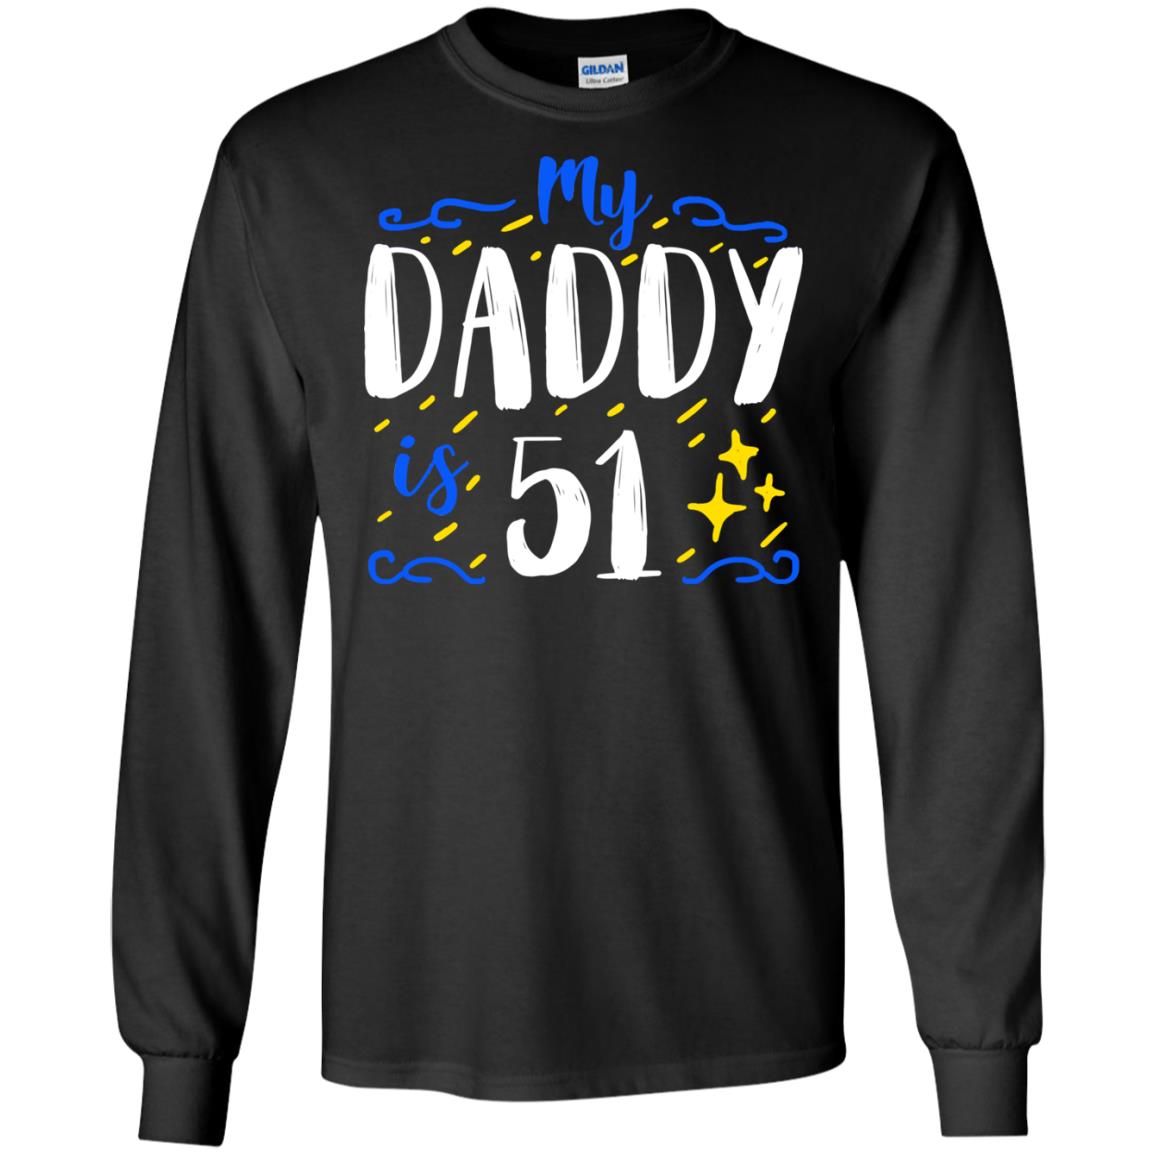 My Daddy Is 51 51st Birthday Daddy Shirt For Sons Or DaughtersG240 Gildan LS Ultra Cotton T-Shirt